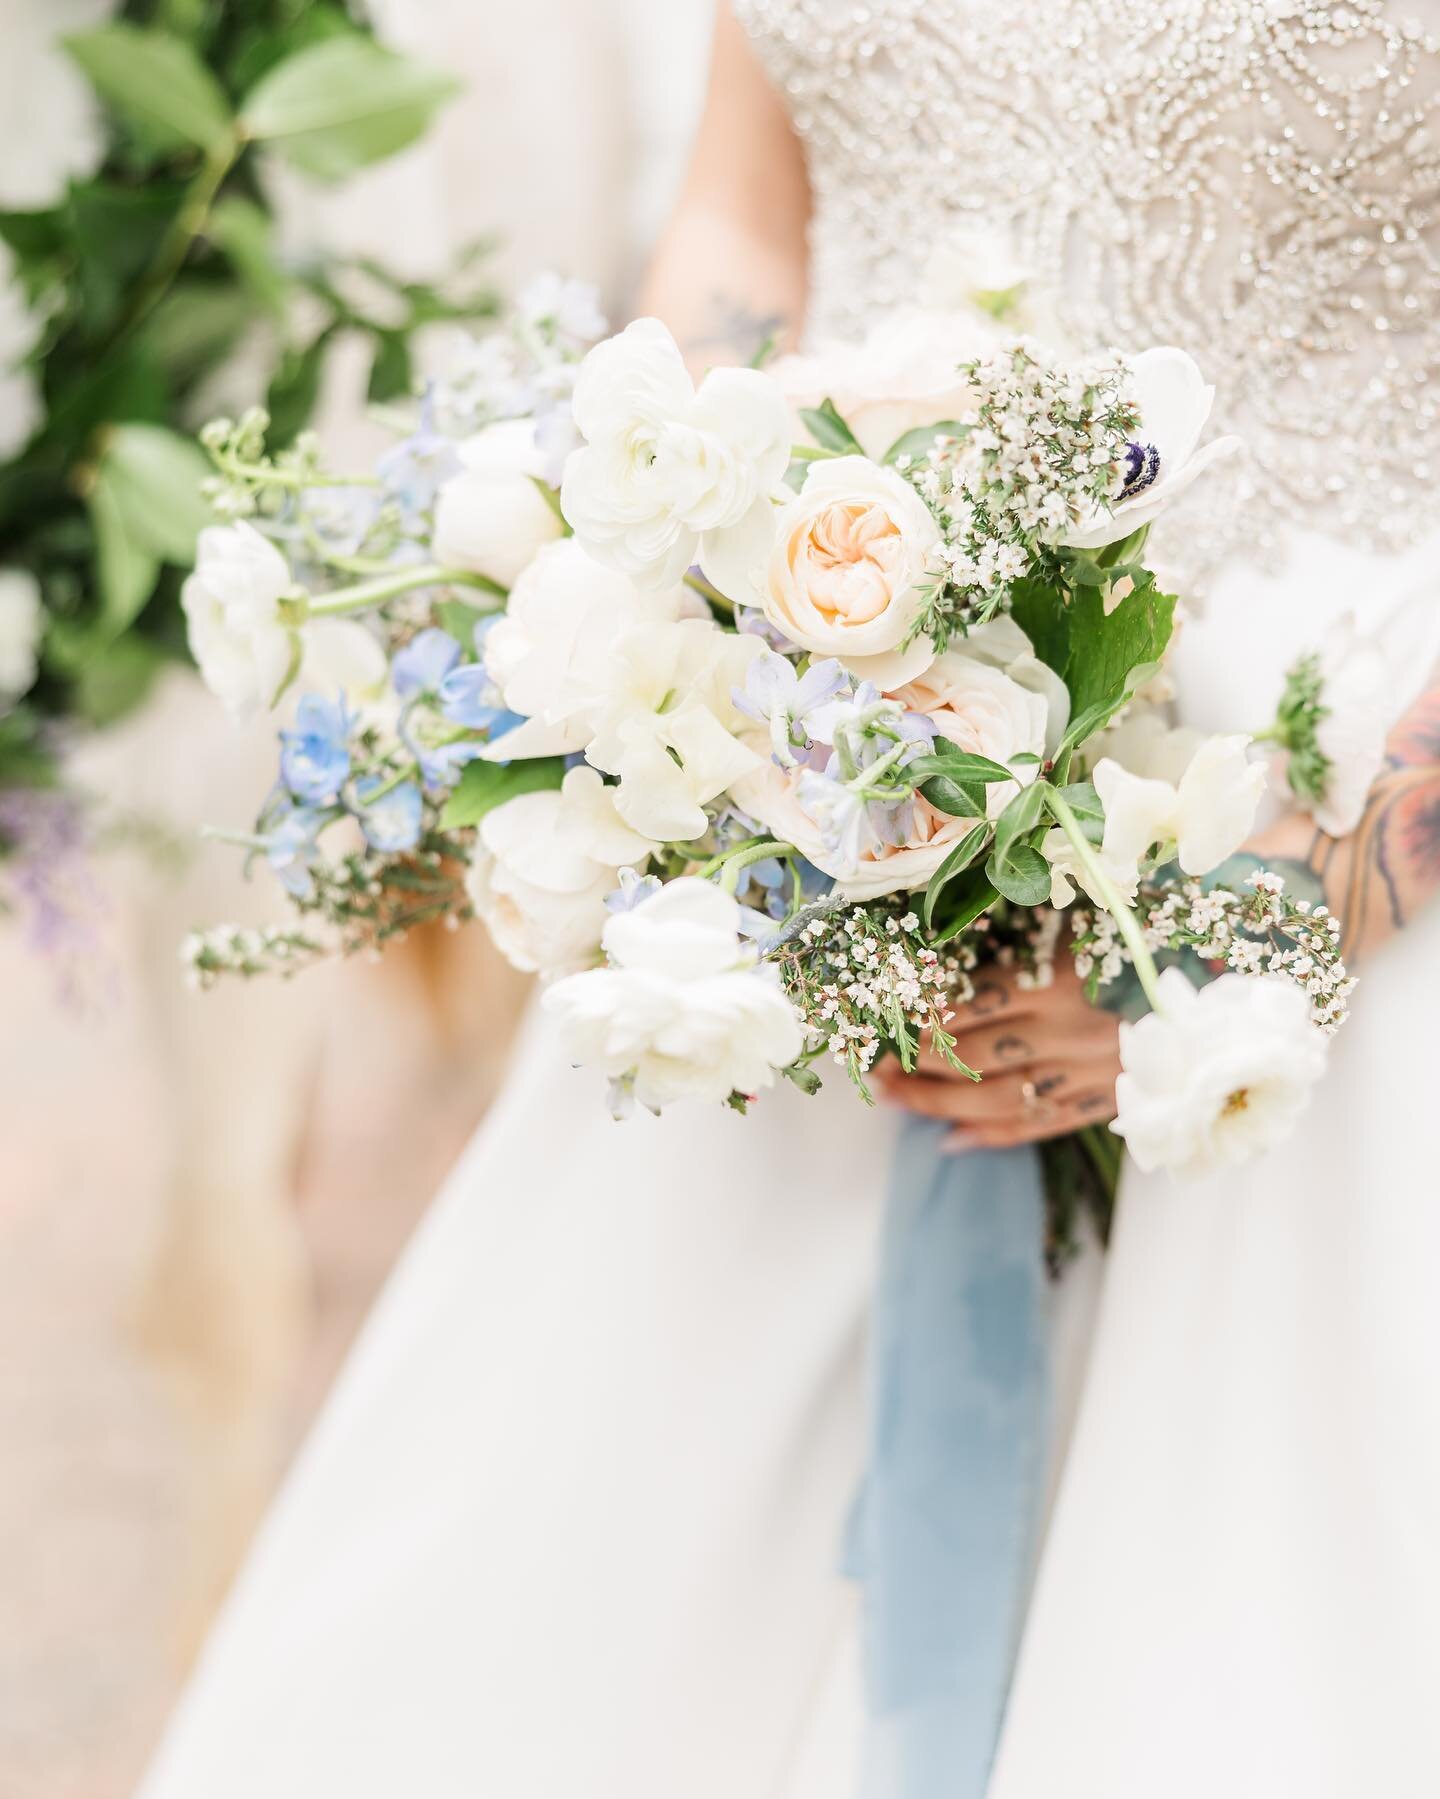 A little something blue for this beautiful springtime bouquet. 

Are you dreaming of a Spring Wedding? What will it be? Dusty mauve, pale lavender, or blue hues? We would love to add color and texture to your special day with custom floral design. In